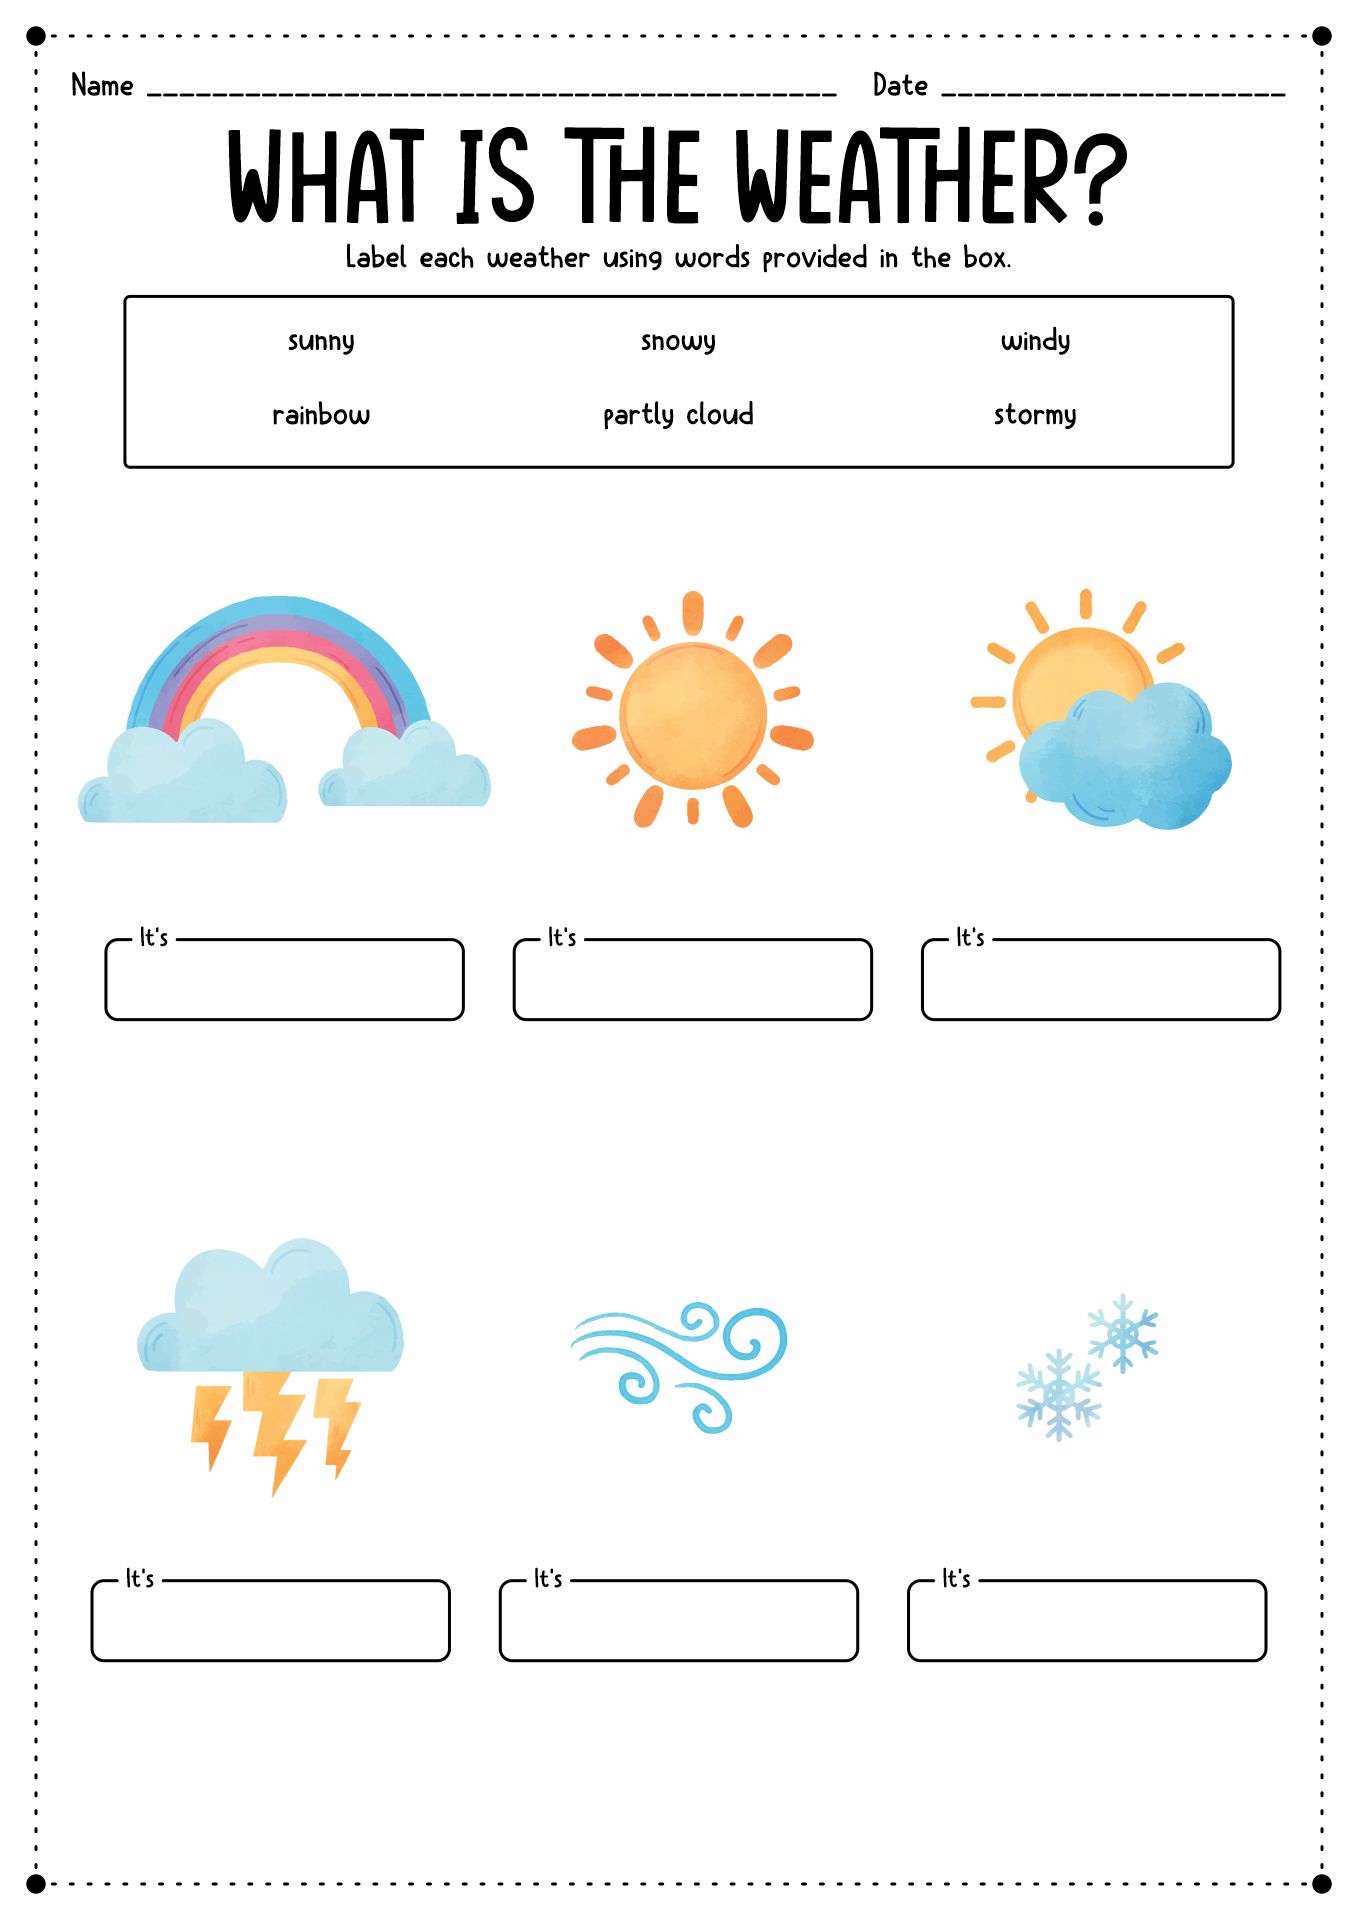 Weather Conditions Worksheets Image